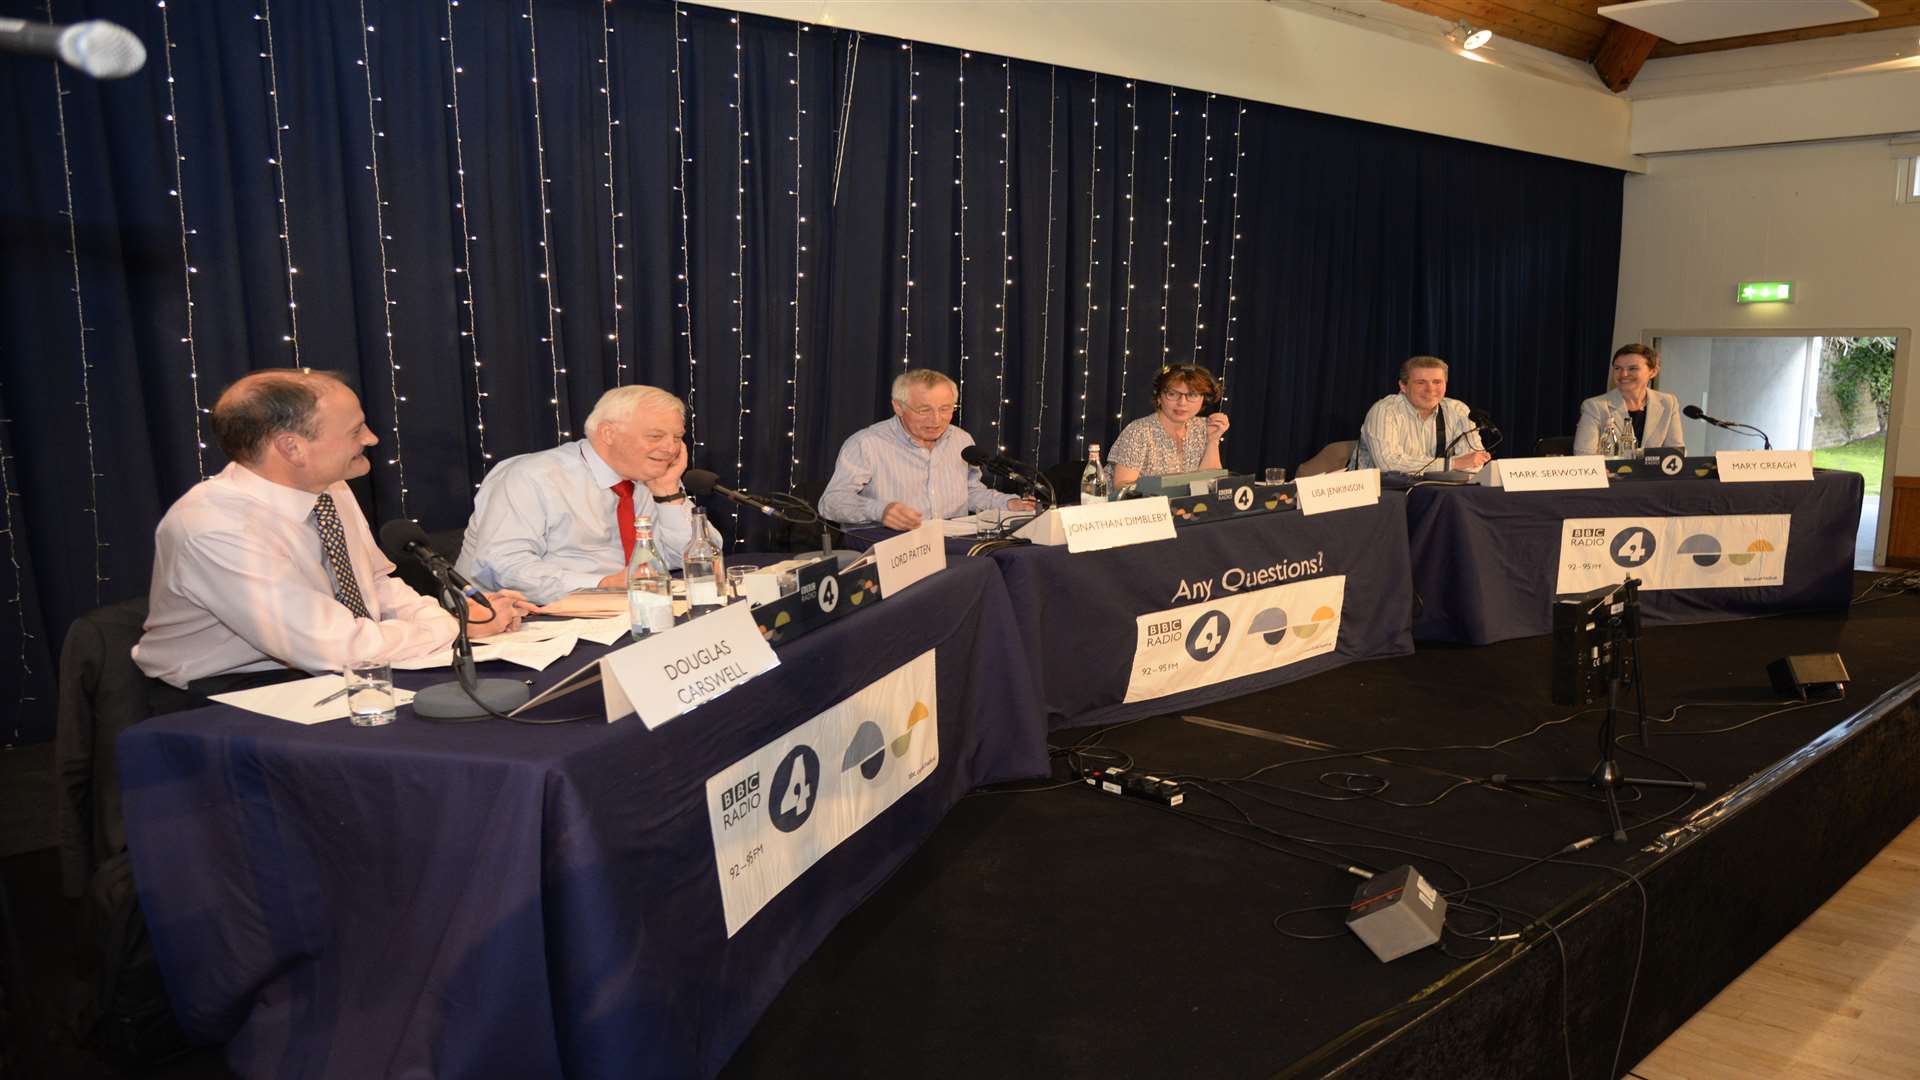 Douglas Carswell, Chris Patten, Jonathan Dimbleby, Producer Lisa Jenkinson, Mark Serwotka and Mary Creagh at BBC Radio 4's Question Time in the Alexander Centre, Faversham